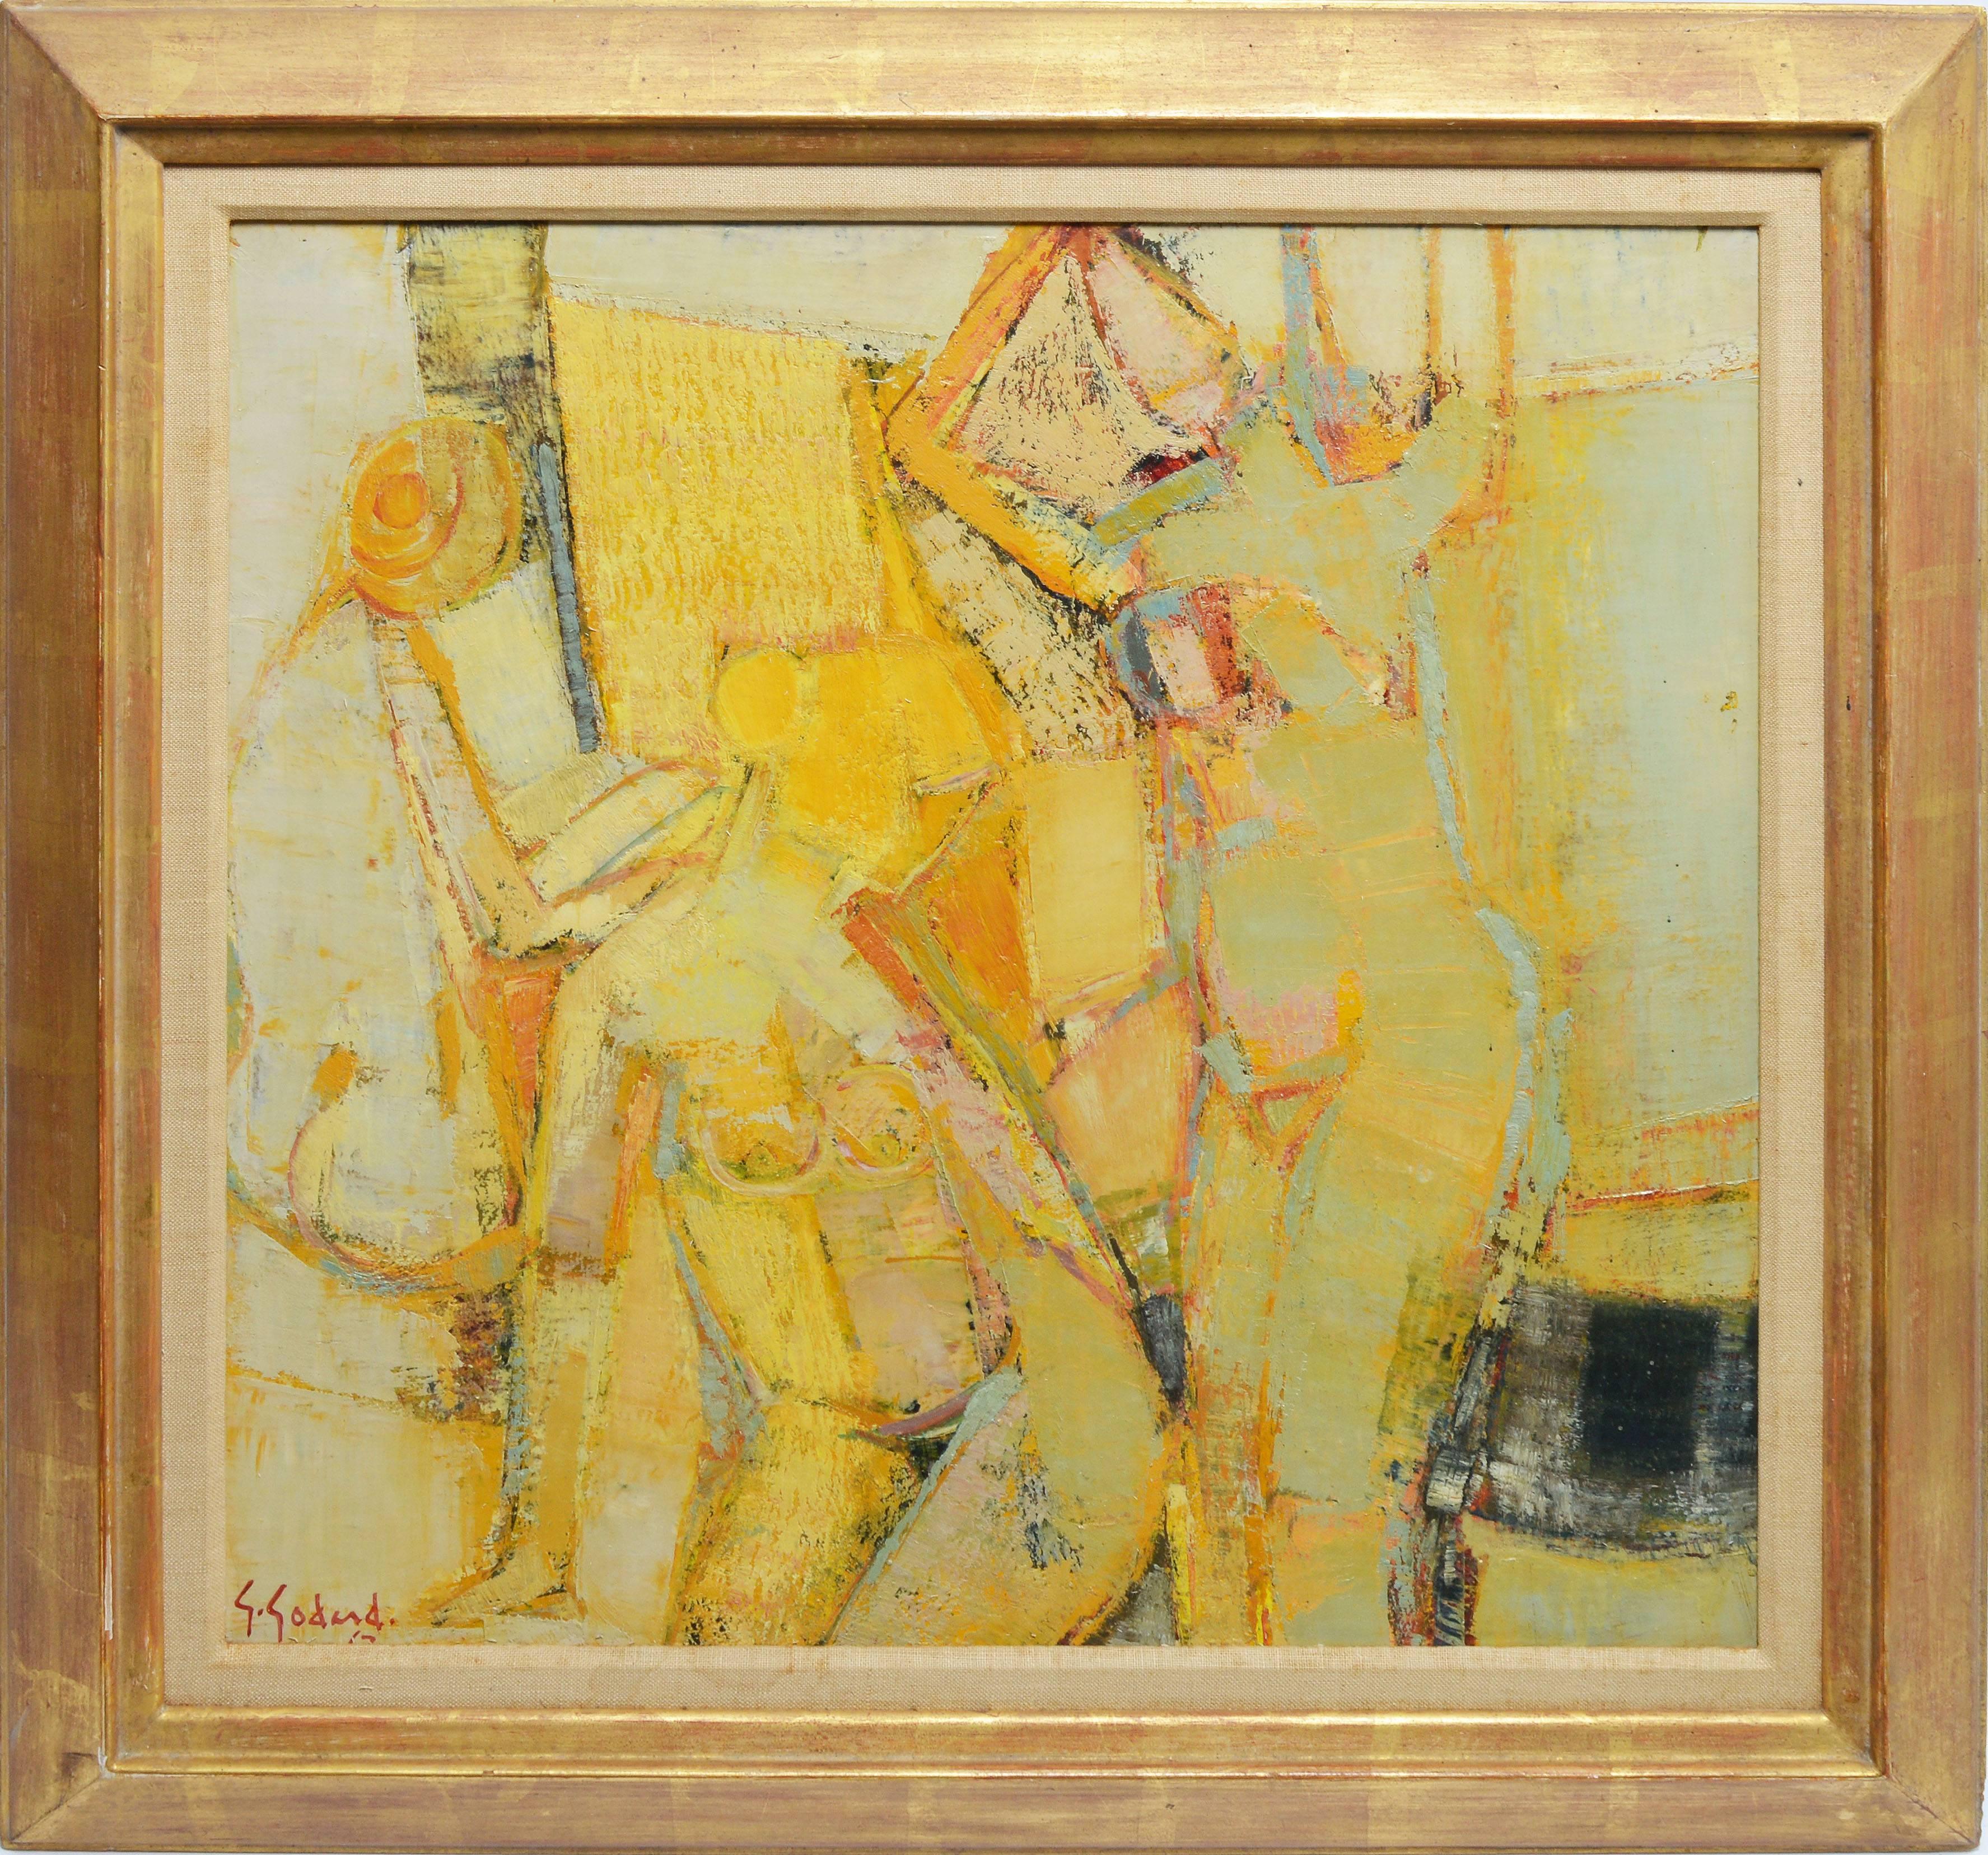 Abstract composition of women in a bath by Gabriel Godard (b.1933).  Oil on canvas, circa 1967.  Signed lower left, &quot;G. Godard&quot;.  Displayed in a giltwood frame.  Image size, 19&quot;L x 19&quot;H, overall 25&quot;L x 25&quot;H.